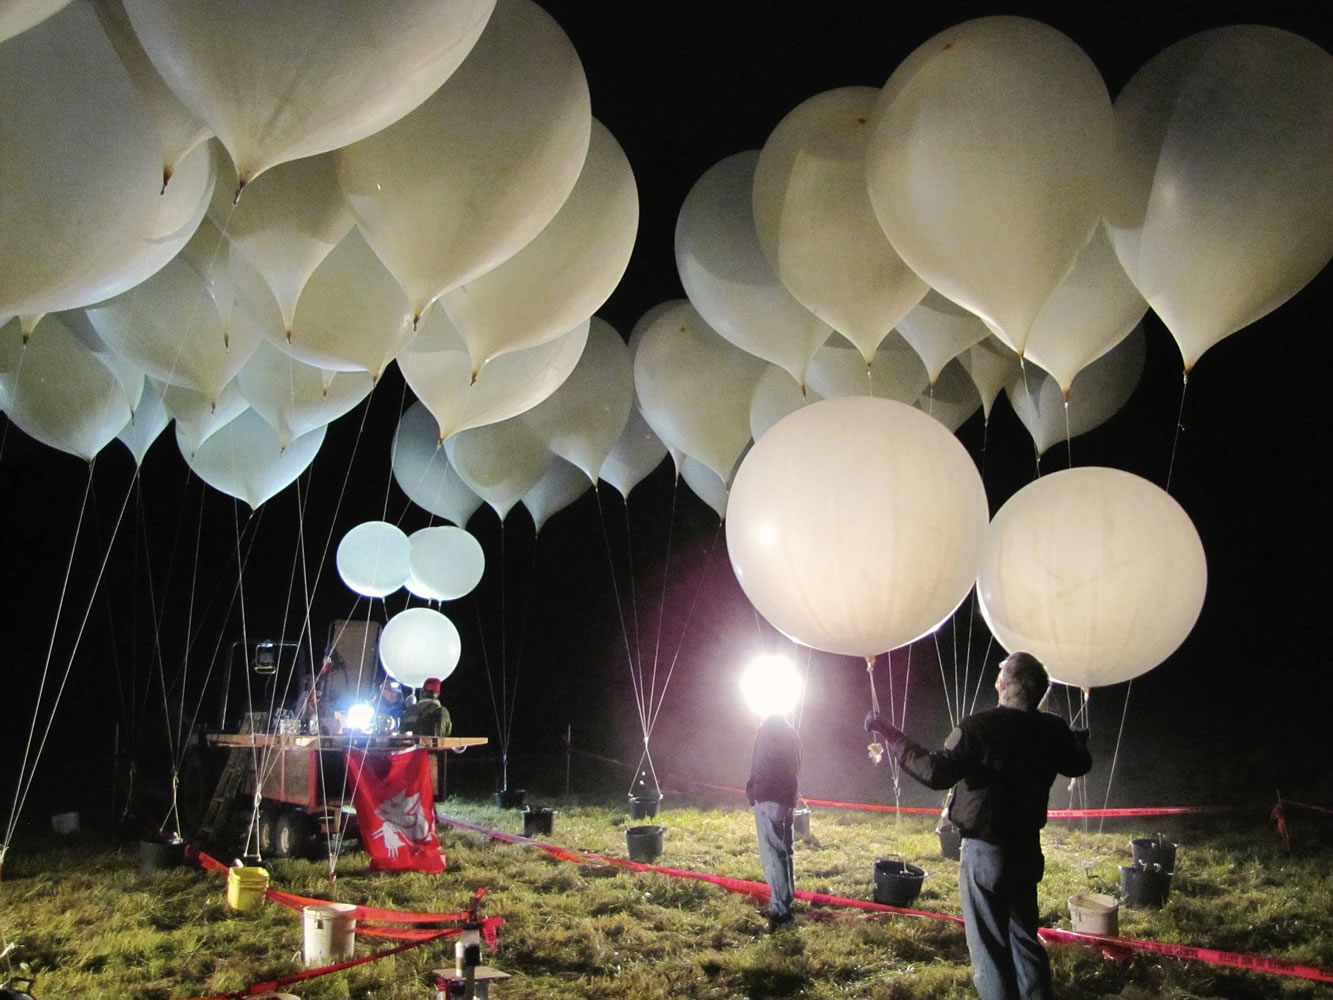 Photos by Tom Vogt/The Columbian
Team members stage clusters of balloons at the launch site before dawn Saturday.